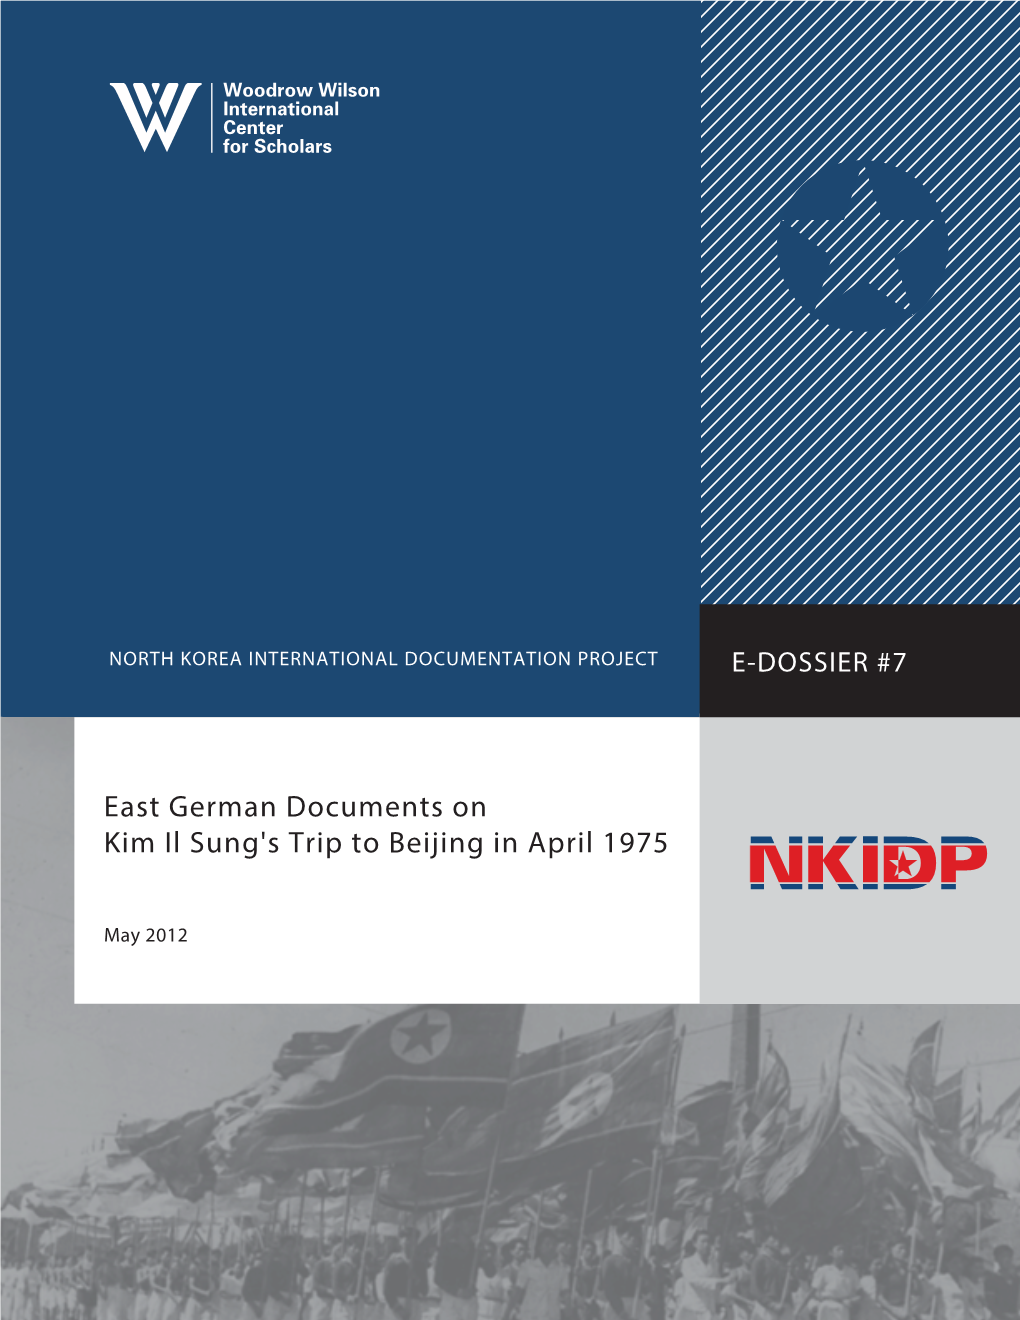 East German Documents on Kim Il Sung's Trip to Beijing in April 1975